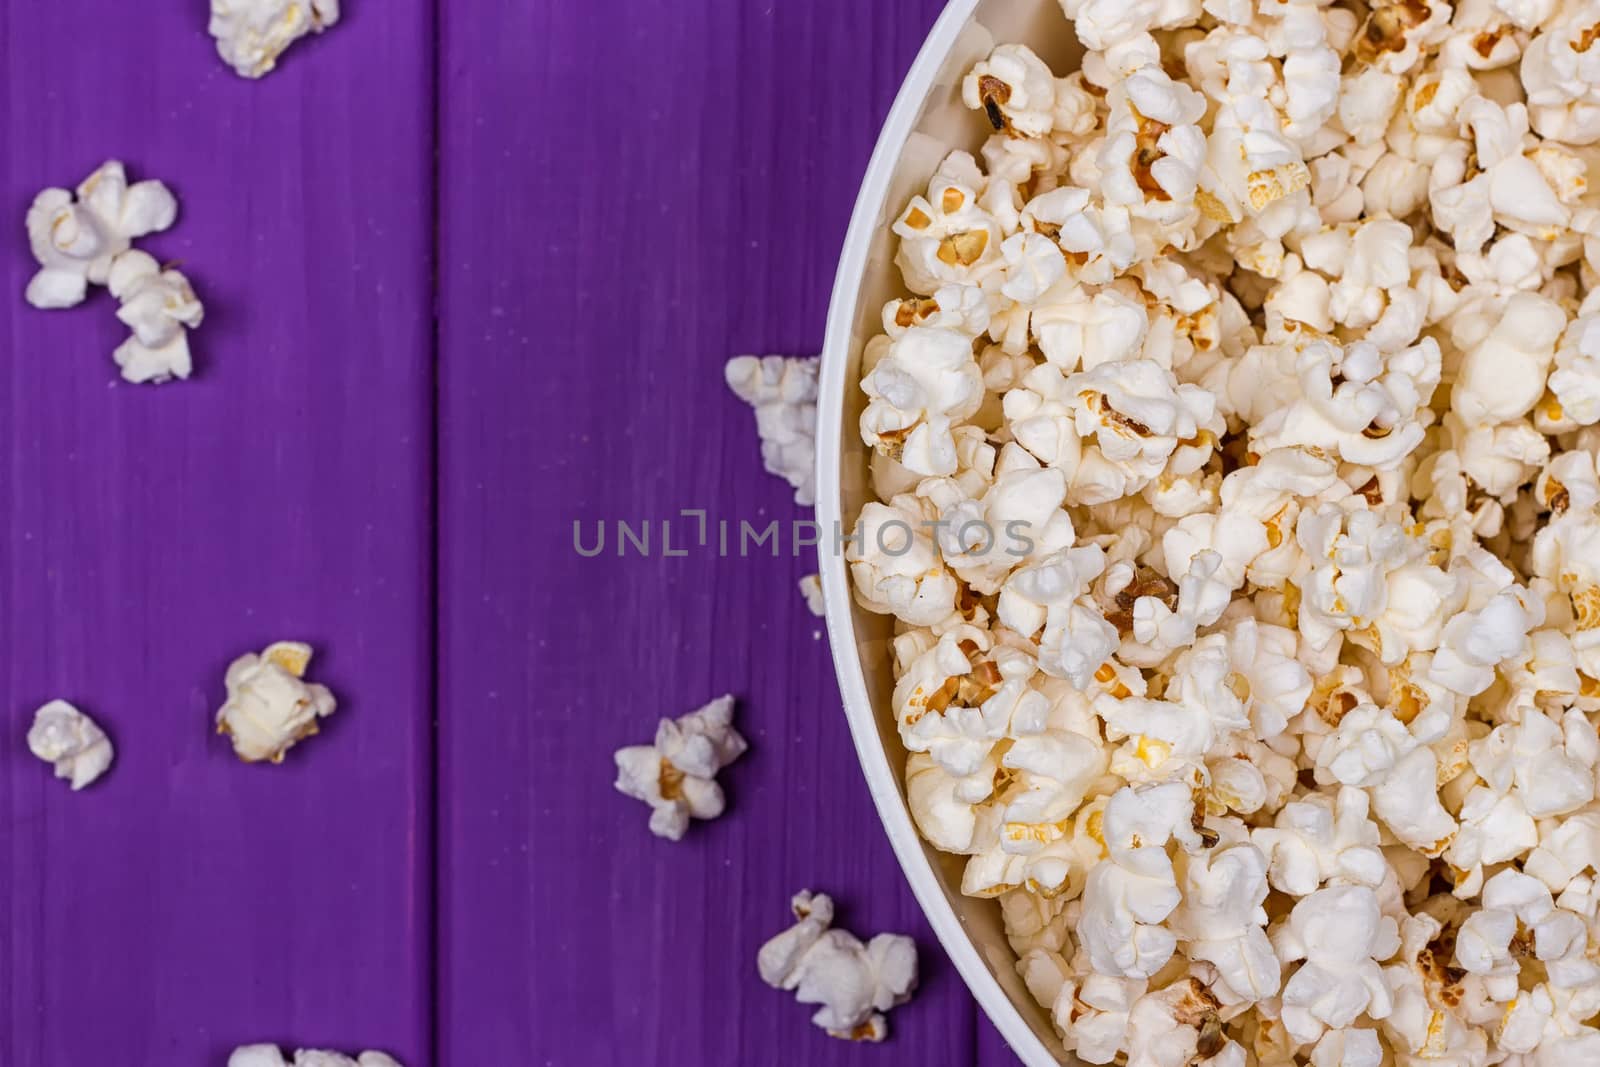 Popcorn in a bowl on purple wooden surface